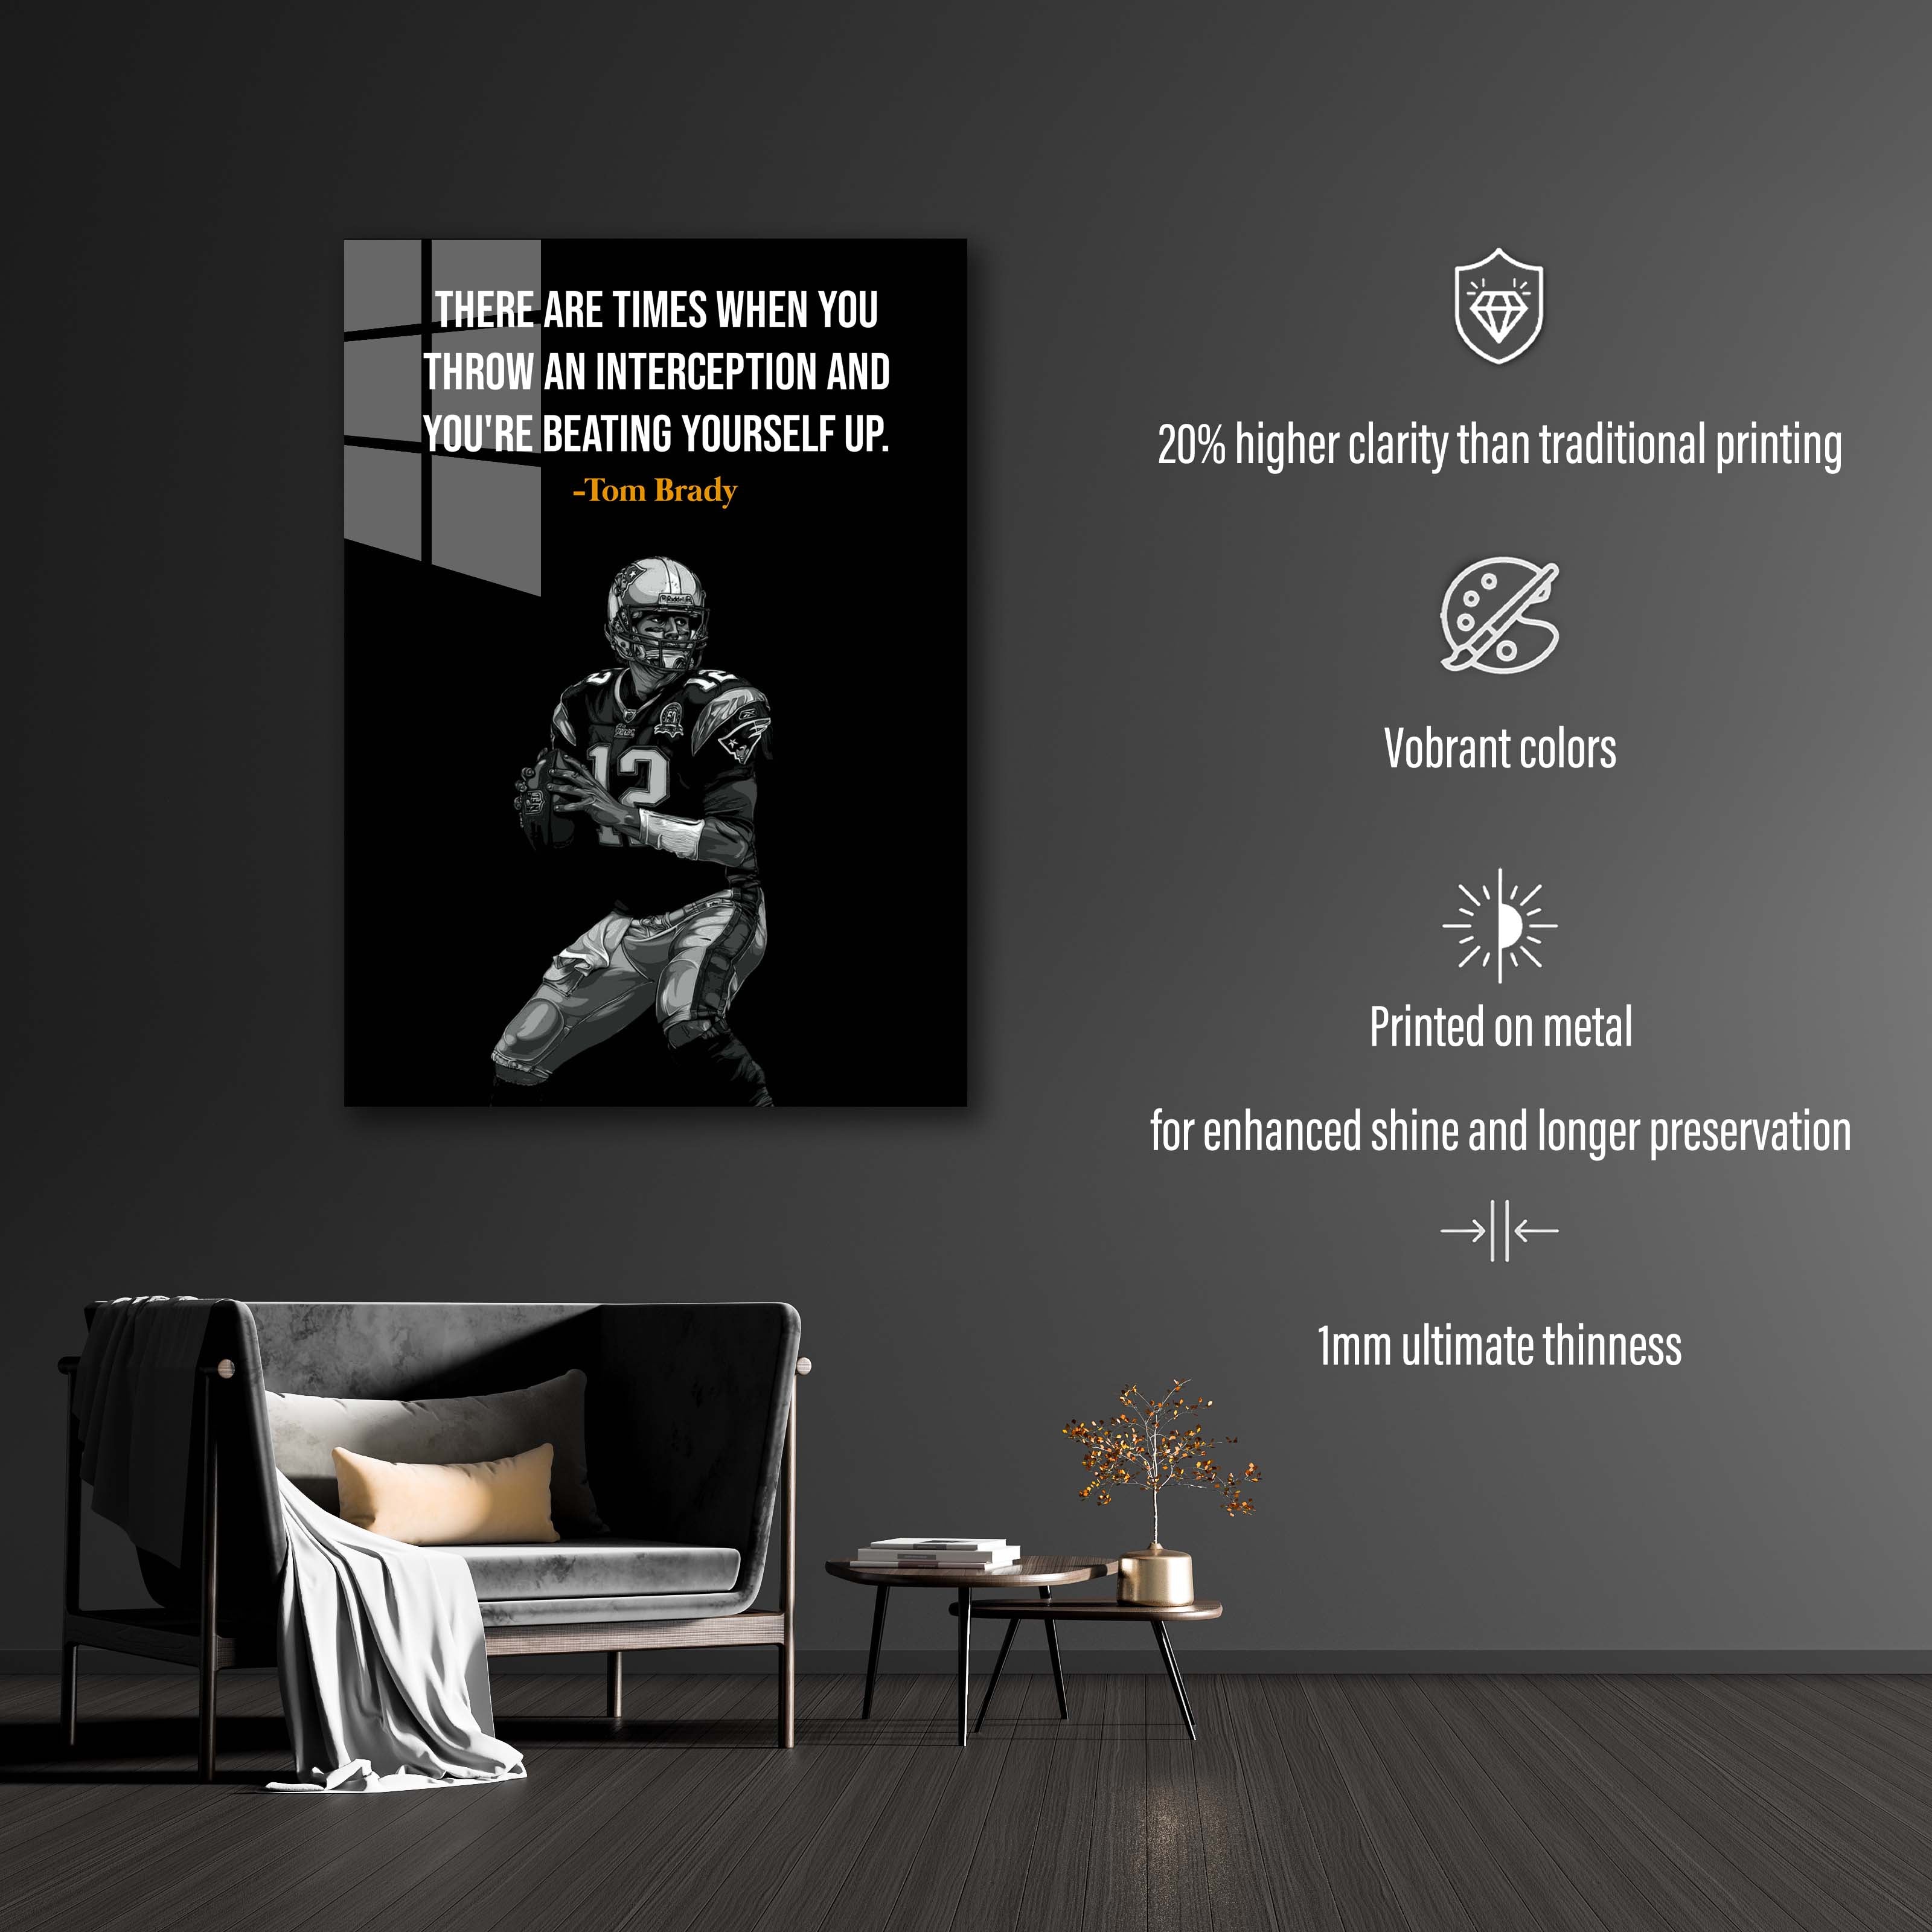 Tom Brady Quotes art-designed by @Pus Meong art